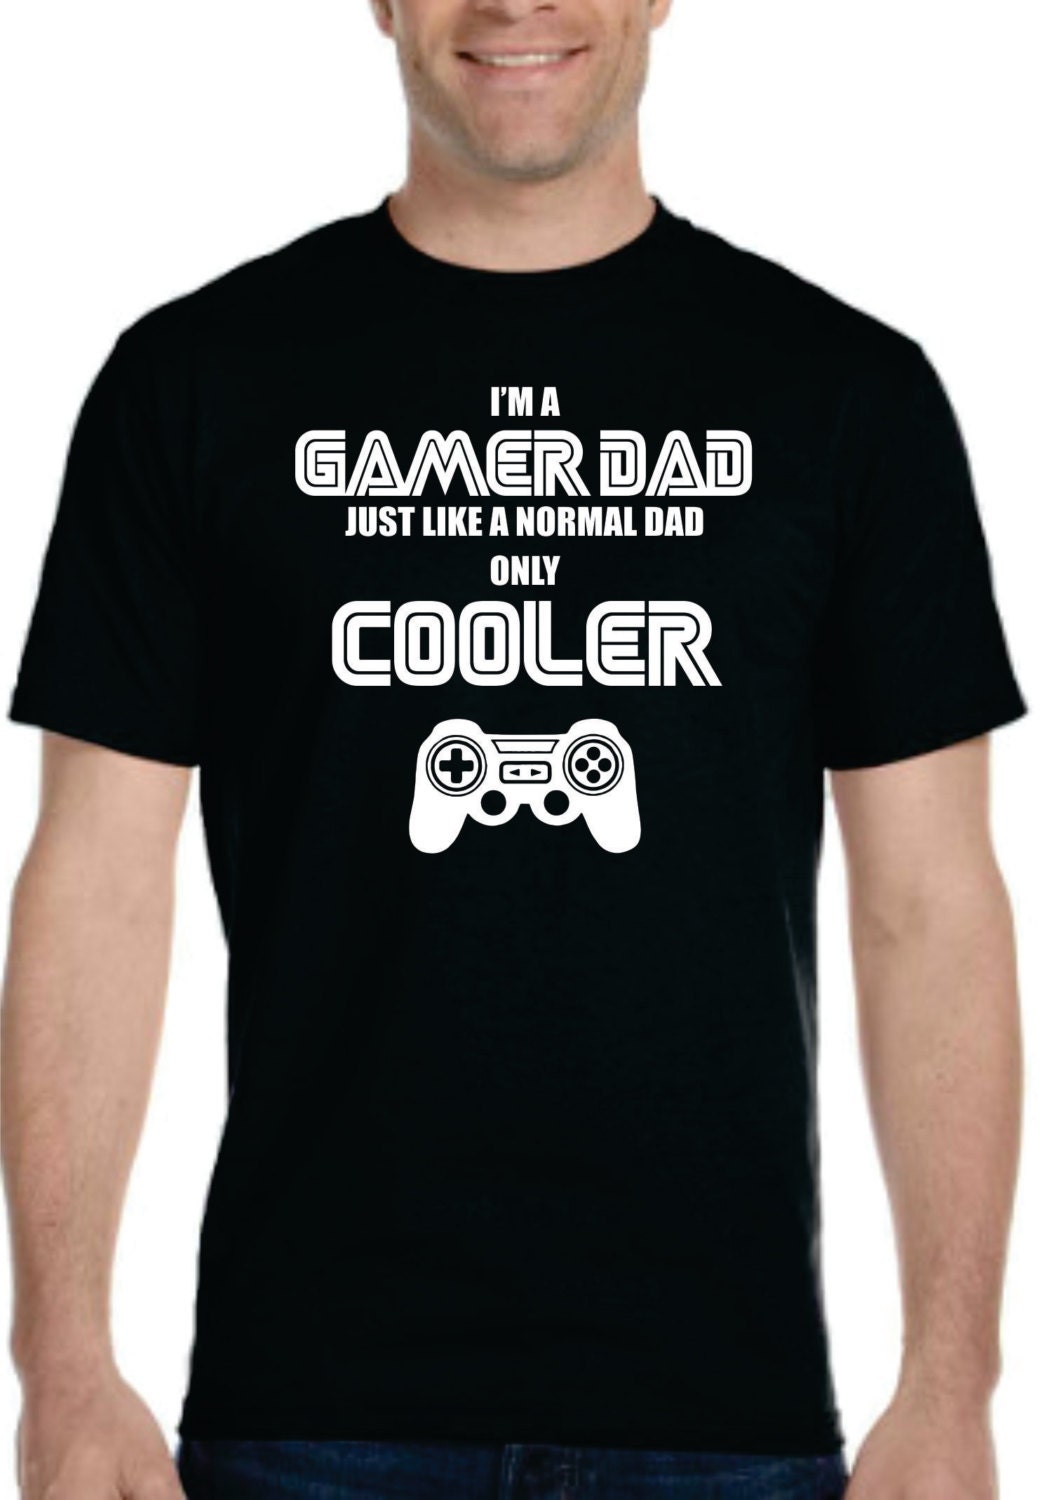 I'm a GAMER DAD just like a normal dad only Cooler. Unique